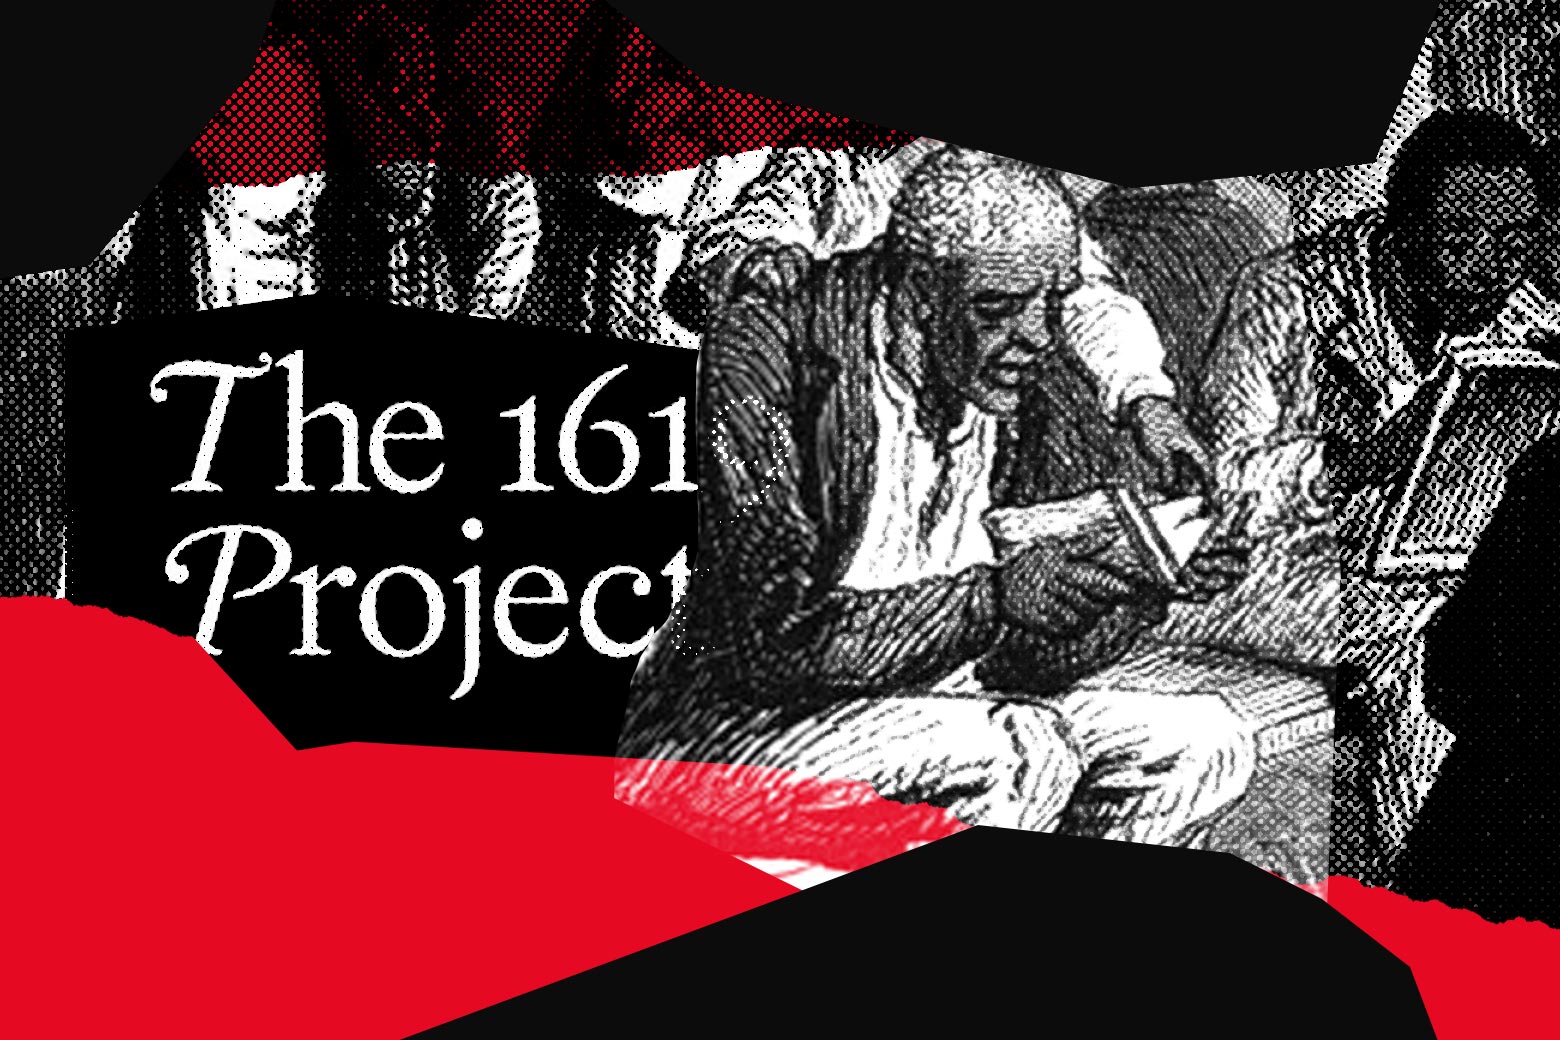 A photo illustration featuring the text "The 1619 Project" and drawings of colonial-era Black Americans.